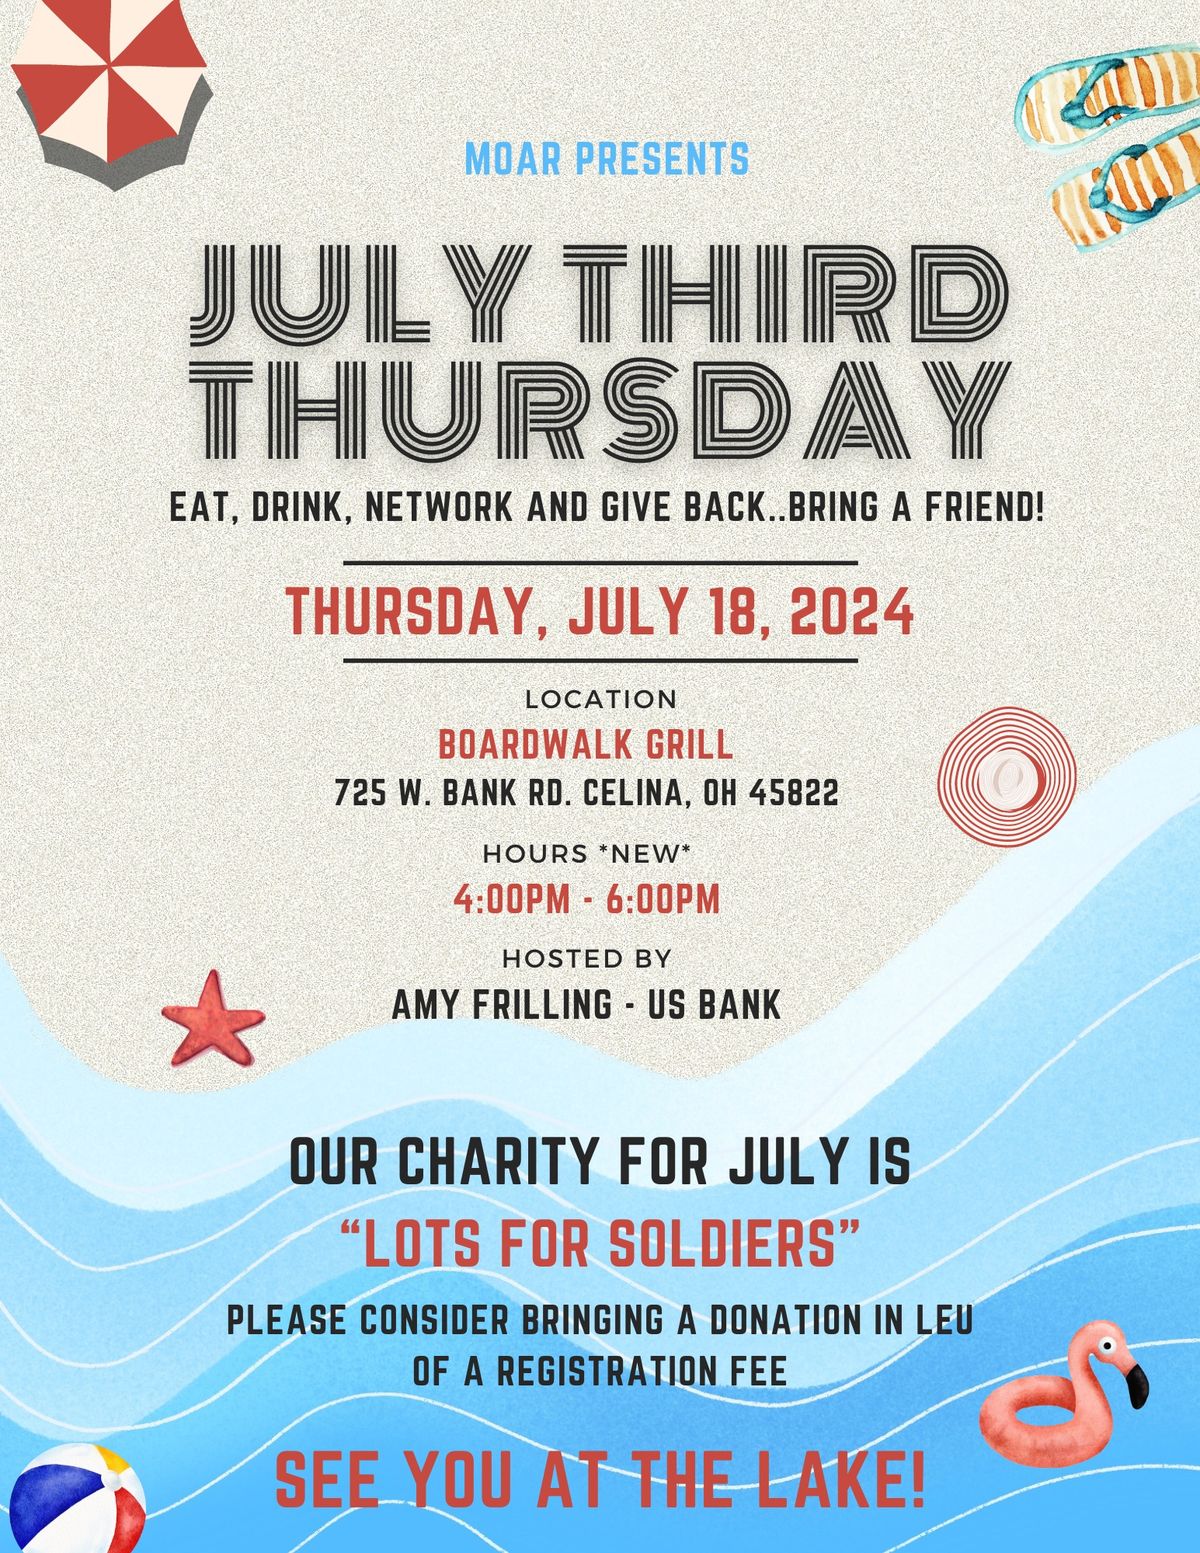 July Third Thursday Networking Event...Boardwalk Grill with U.S. Bank